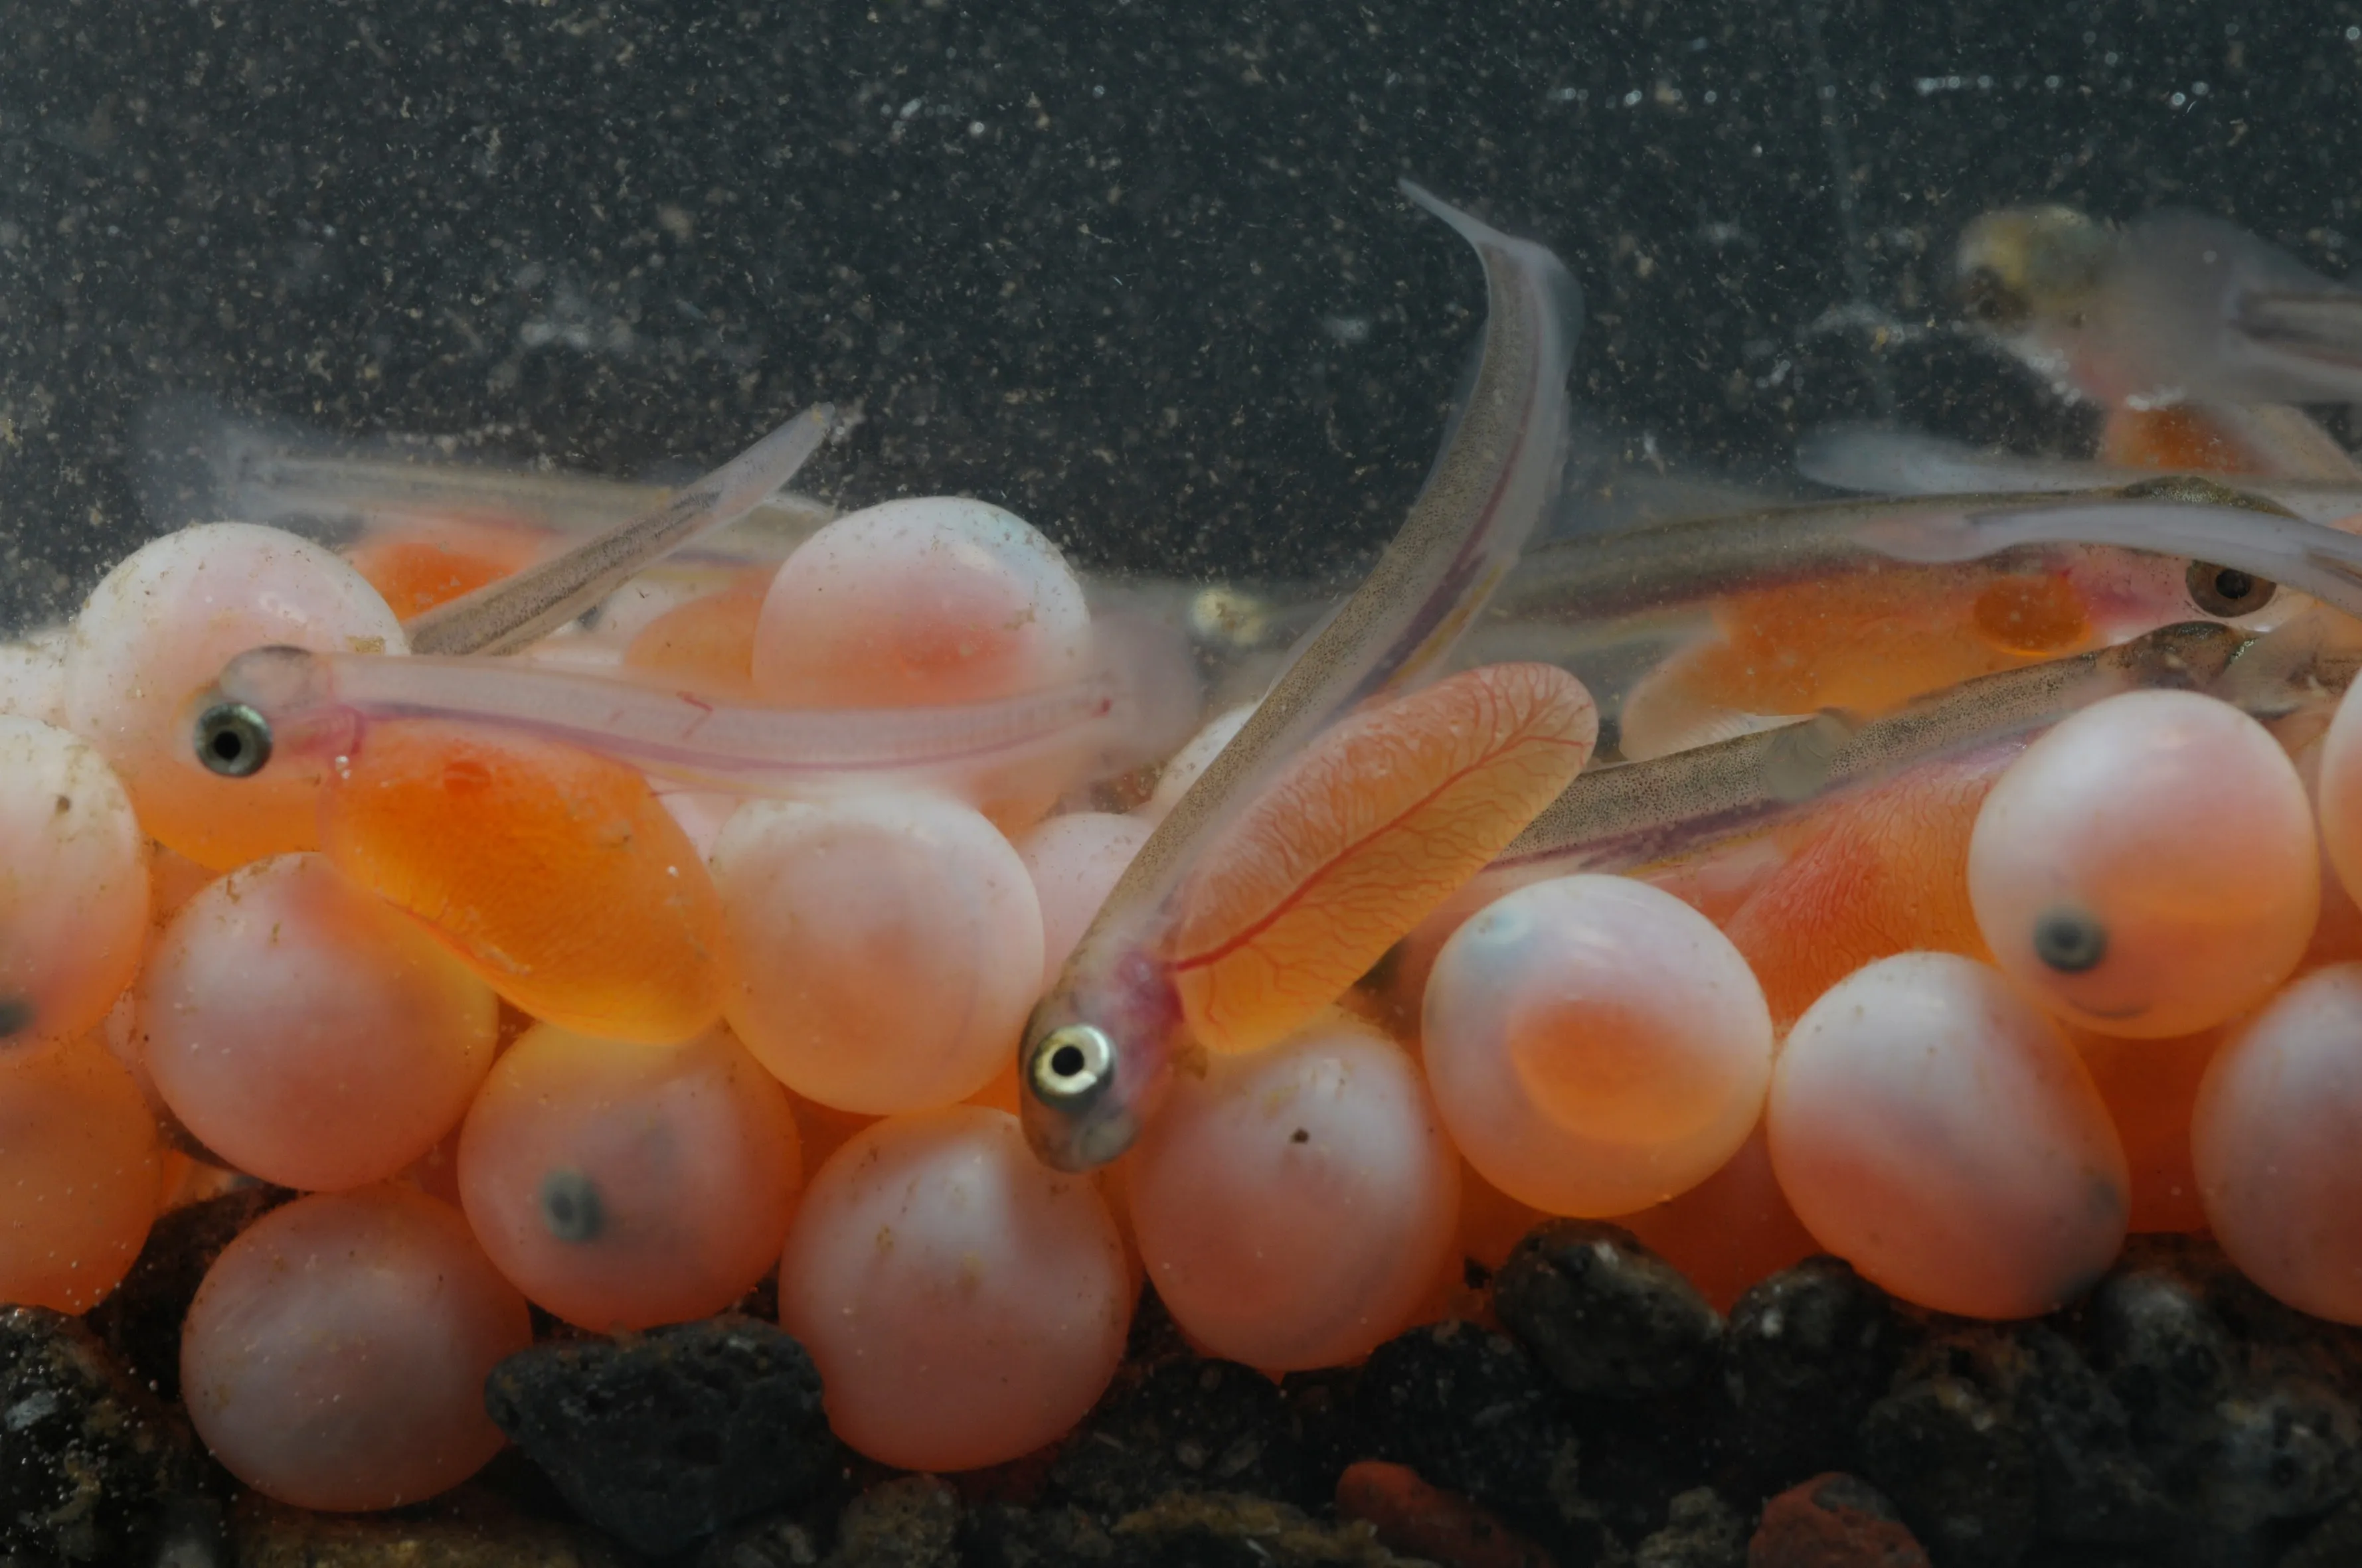 A group of Salmon eggs and babies in water.